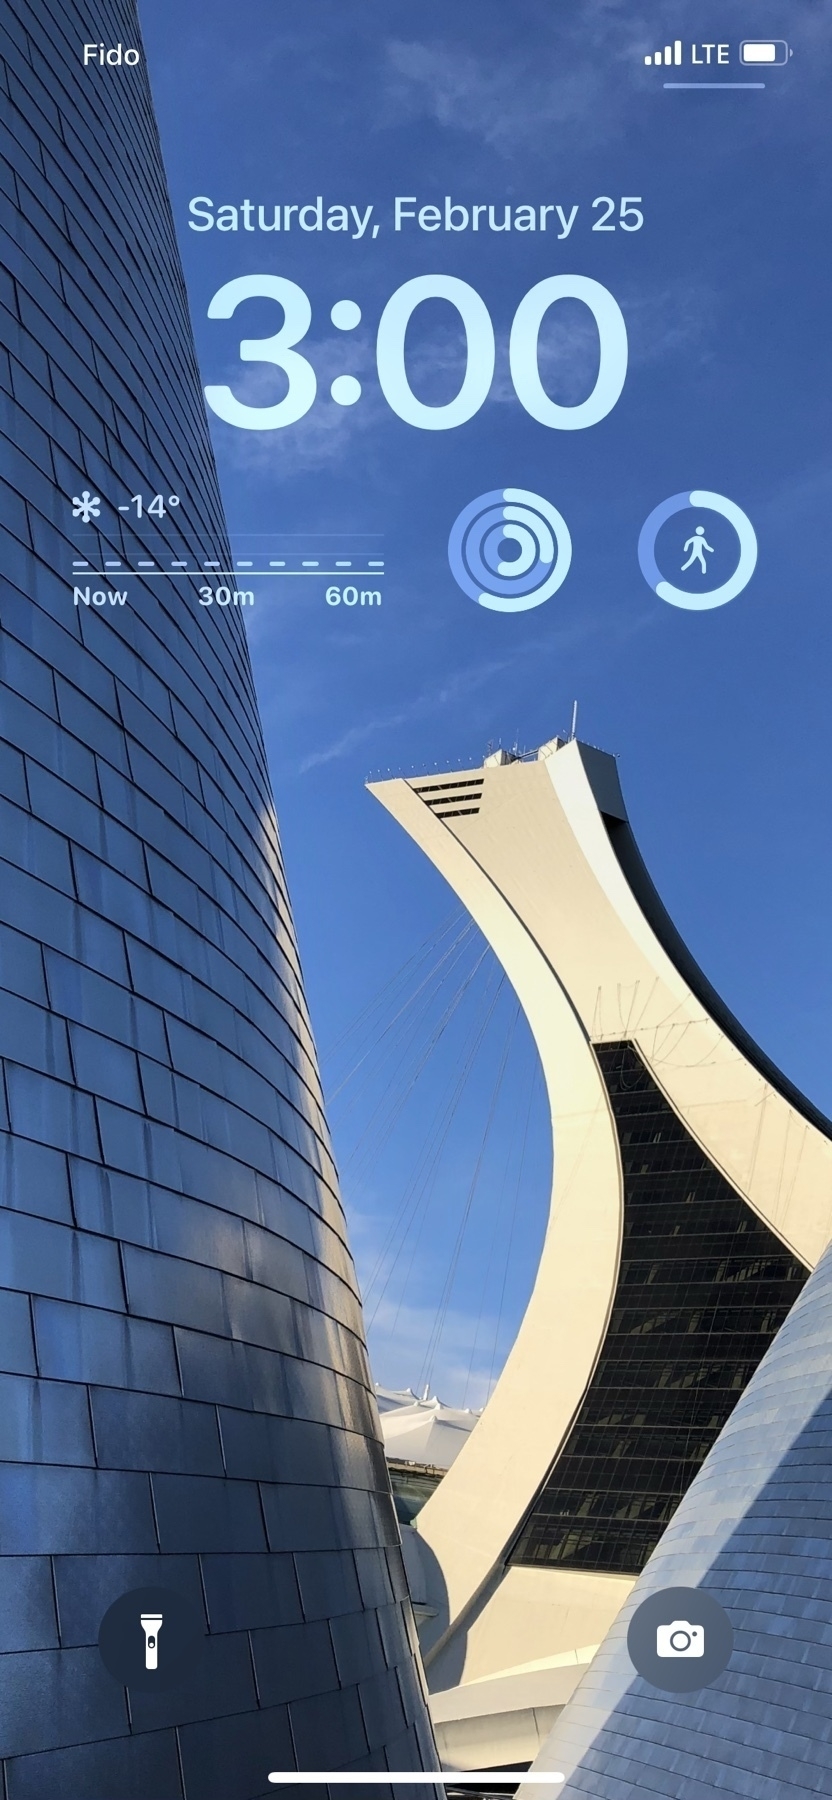 A screenshot of an iPhone lock screen showing the Montreal Tower at the Olympic Park between the twin domes of the Montreal Planetarium.